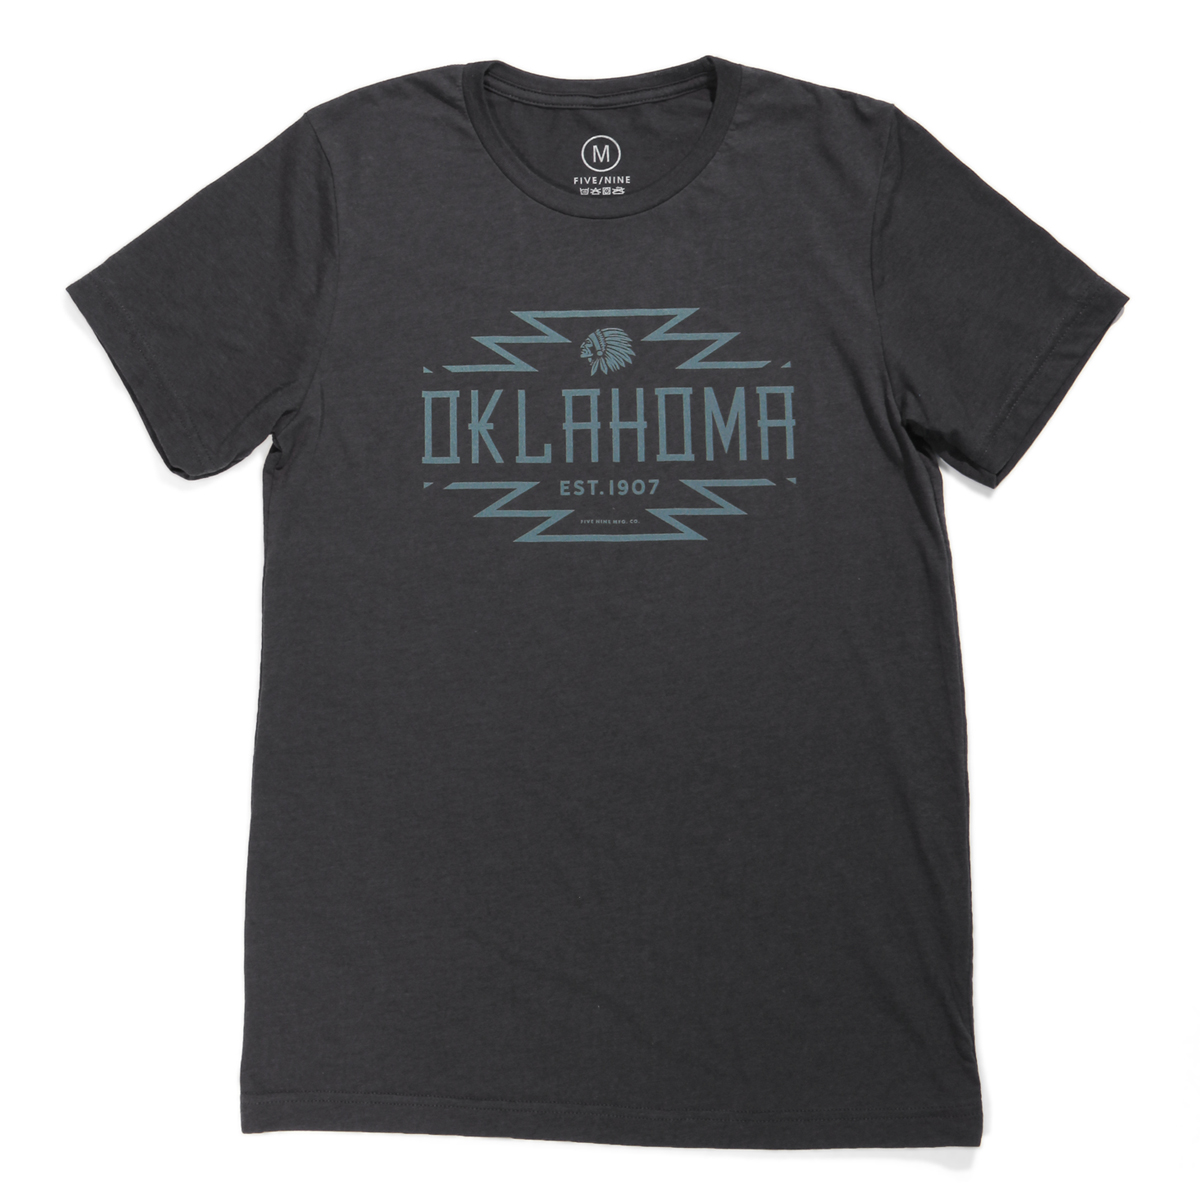 Oklahoma City 89ers T-shirt by prolinedesigns #Aff , #Affiliate, #City, # Oklahoma, #prolinedesigns, #shirt